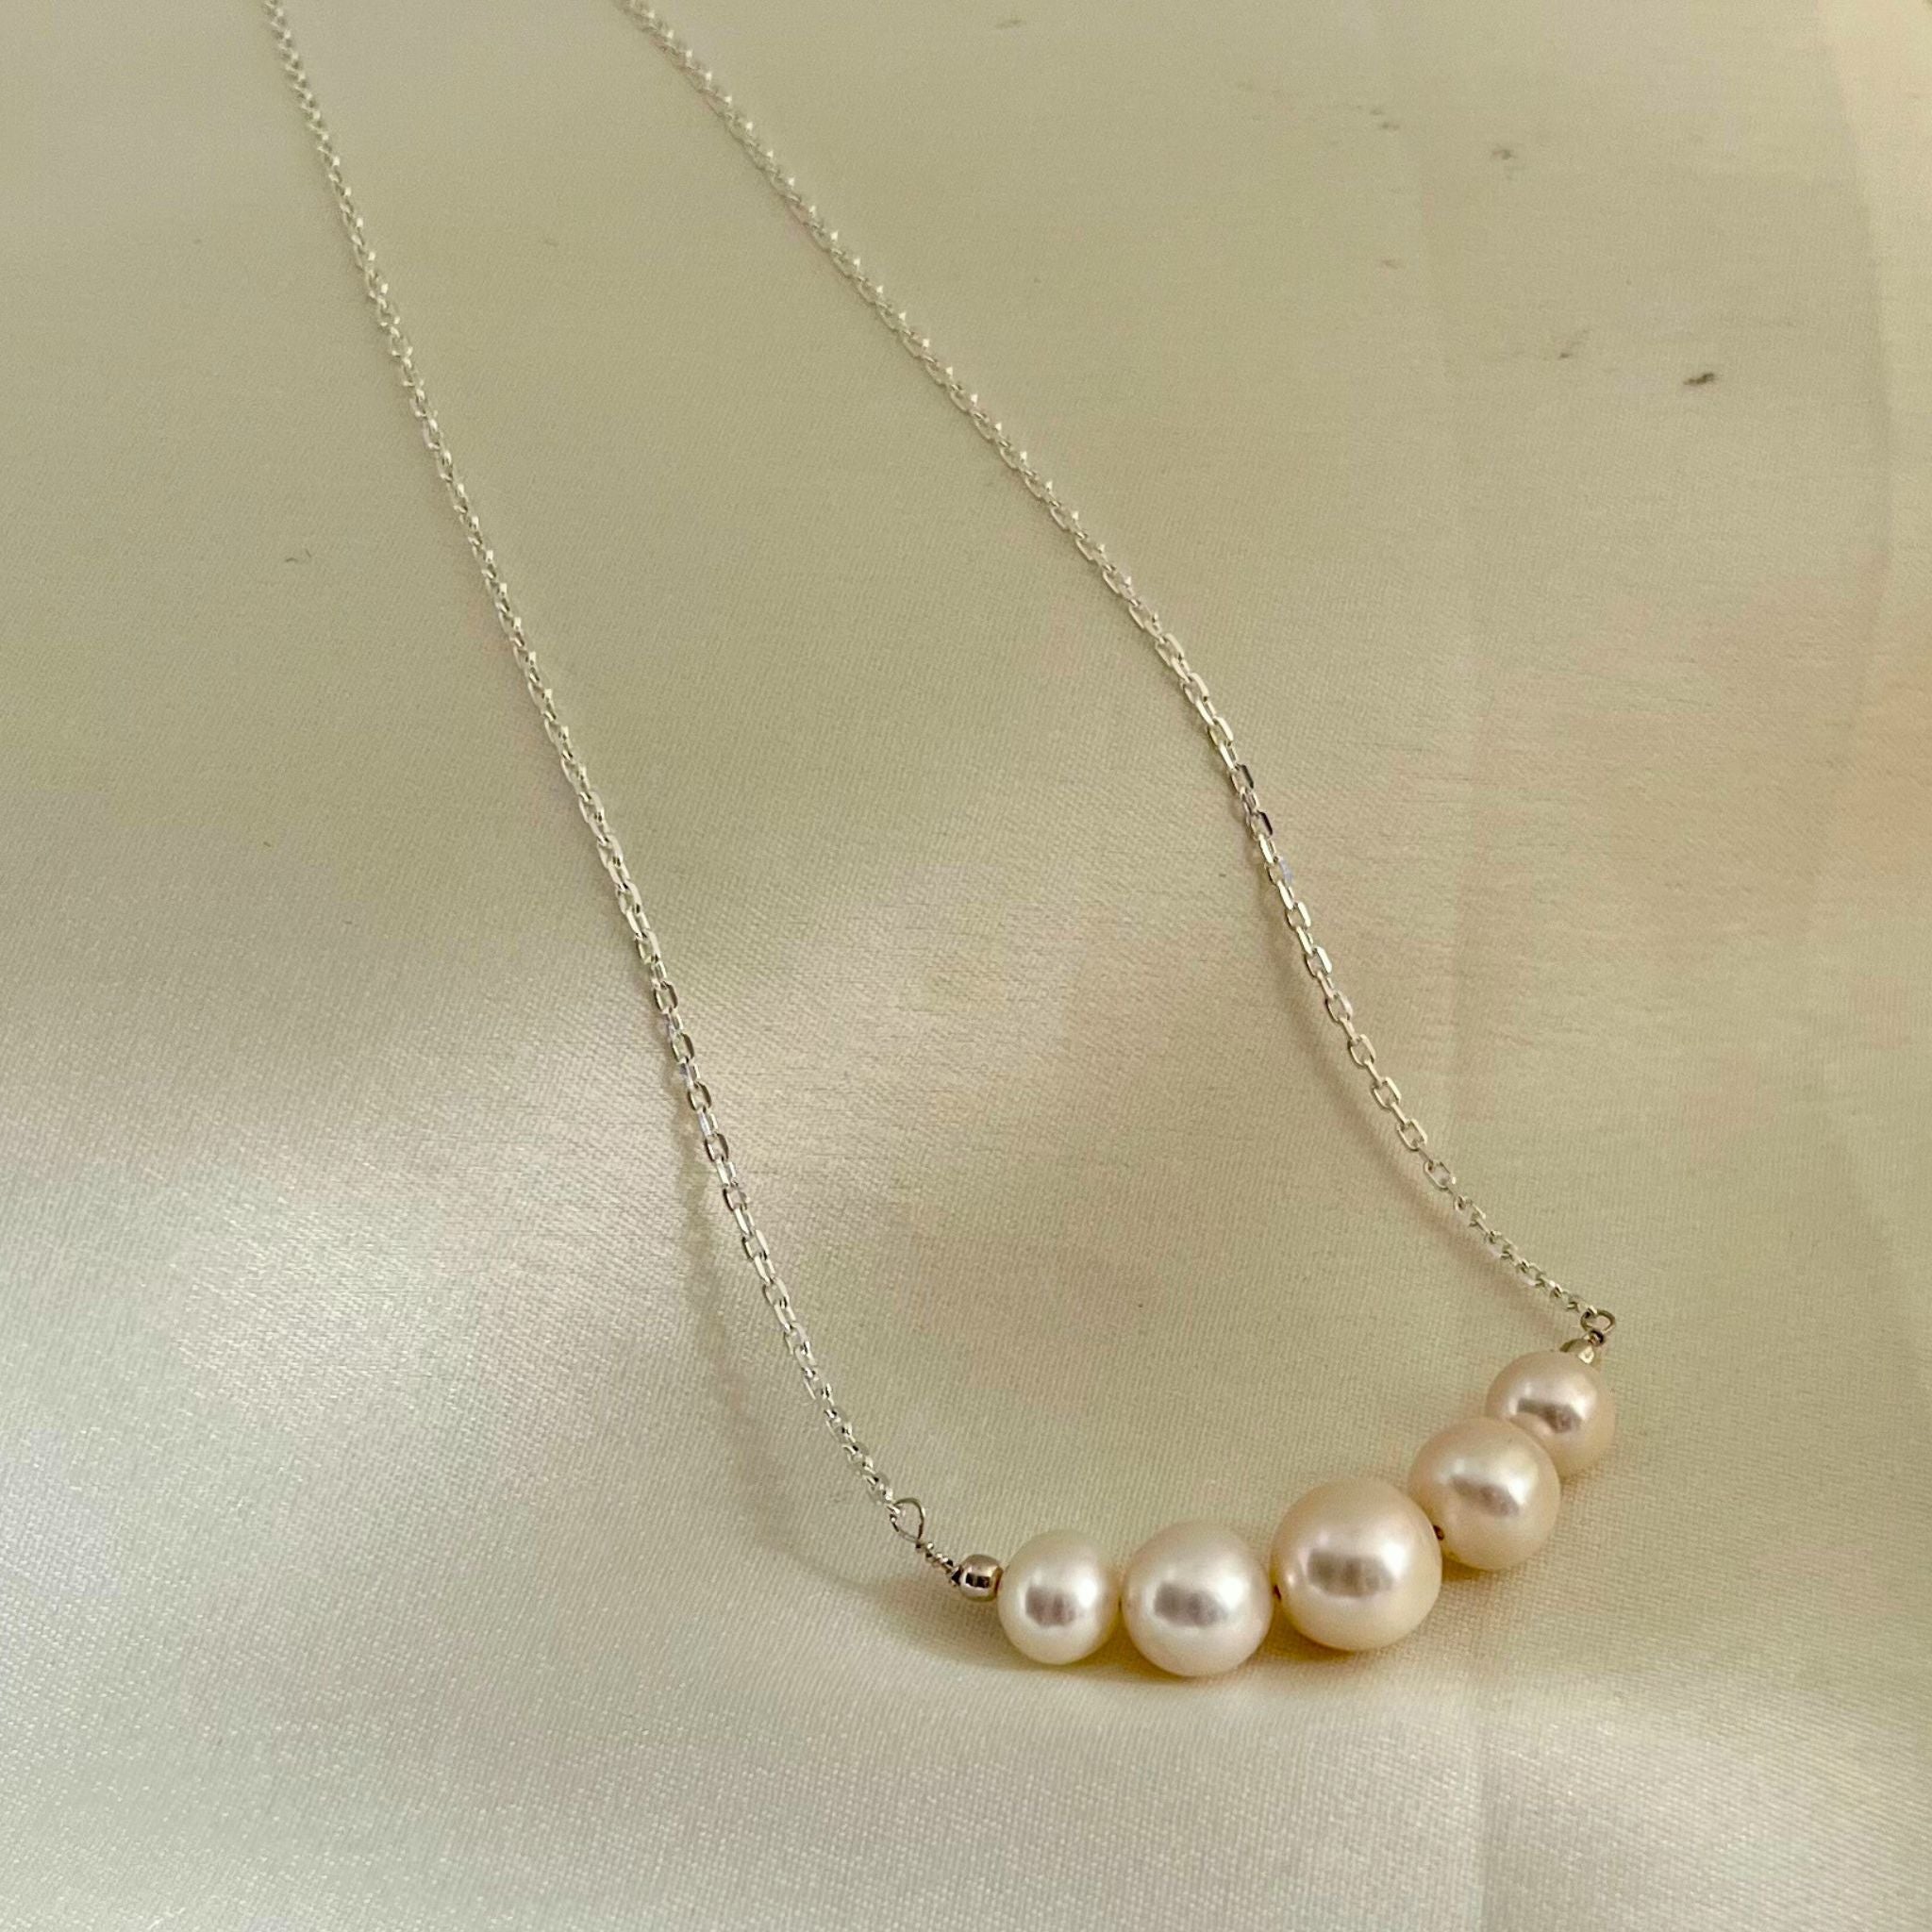 Pearl Necklace, Satellite Chain, 14K Gold Filled, Real Round Pearl Charm,  Wedding Jewellery, Gift for Her, Mother's Day Present, Bridesmaid, dainty,  minimalist, choker necklace, high quality, handmade